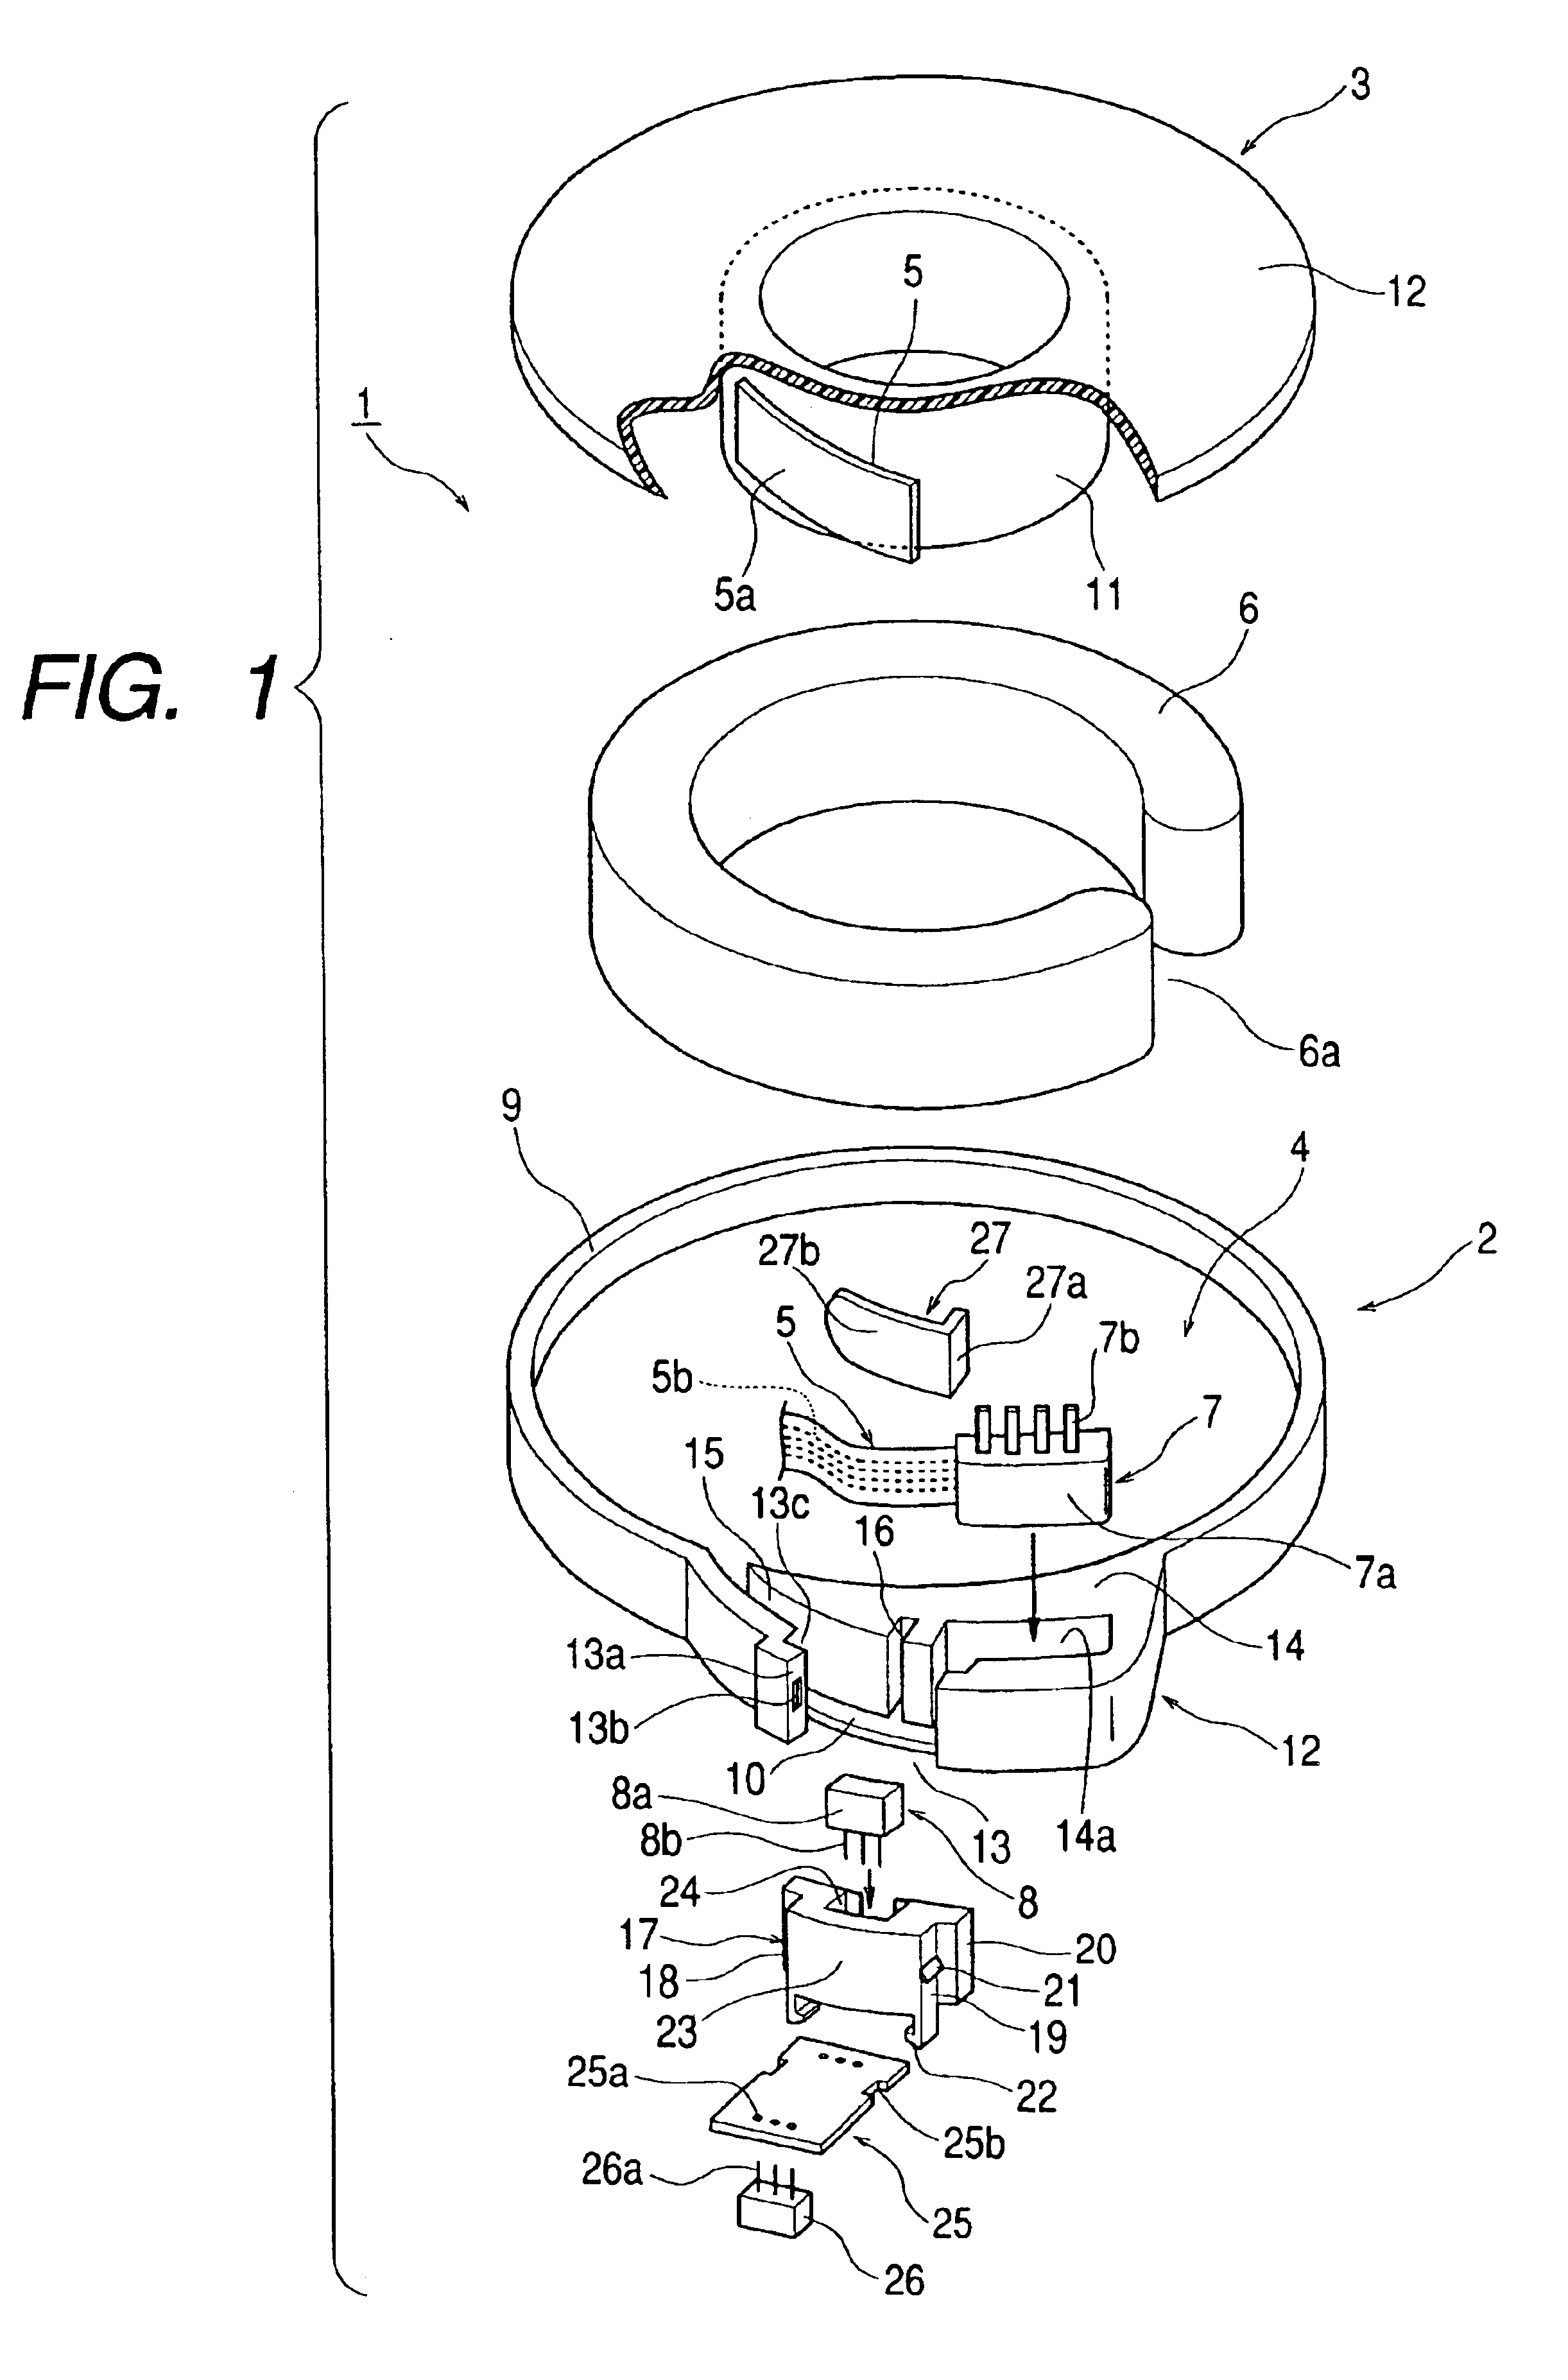 Rotary connector that prevents excessive temperature increase generated in a flexible cable